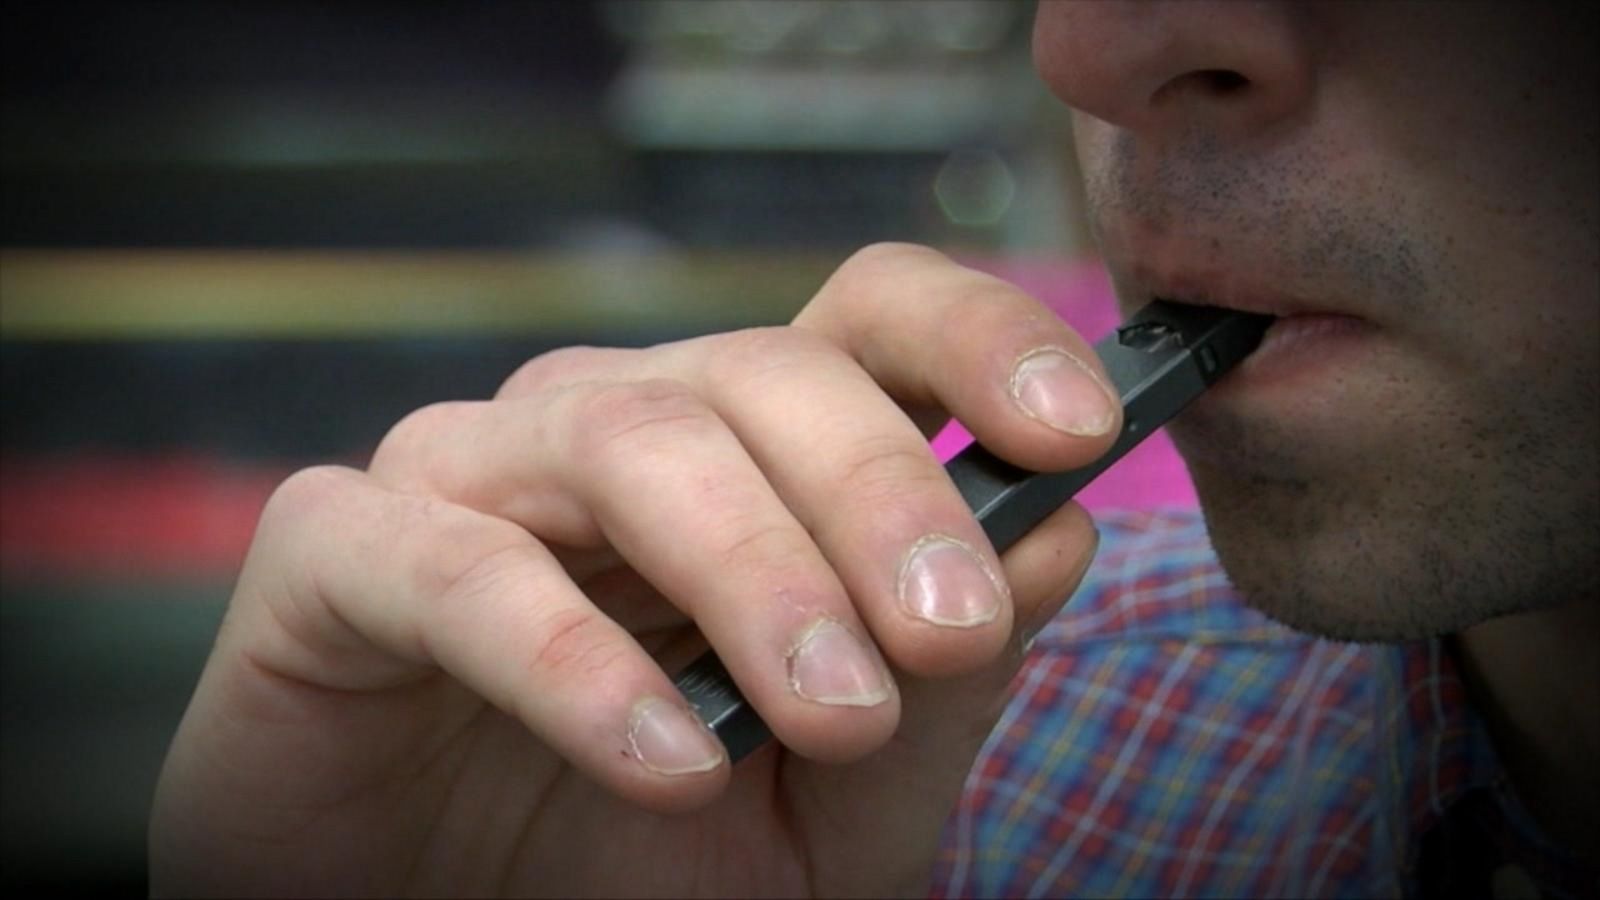 VIDEO: 2 vaping-related deaths reported in Minnesota